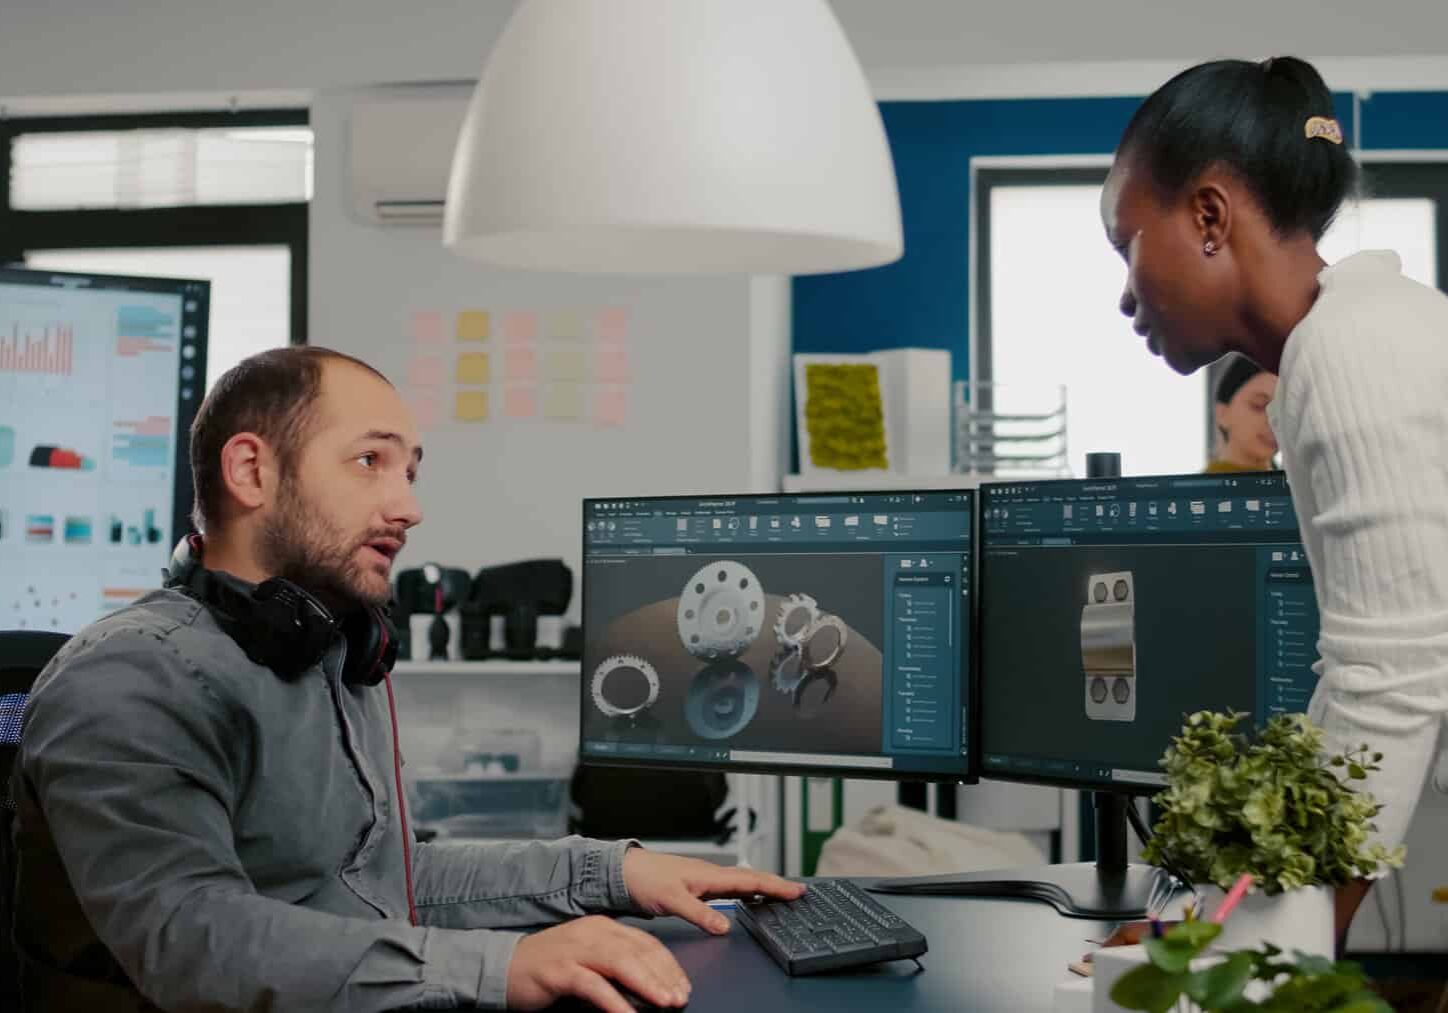 Mechanical engineer working on computer designing in CAD software 3D model of engine while african coworker asking help. Man using pc with two monitors innovating motor prototype in creative agency